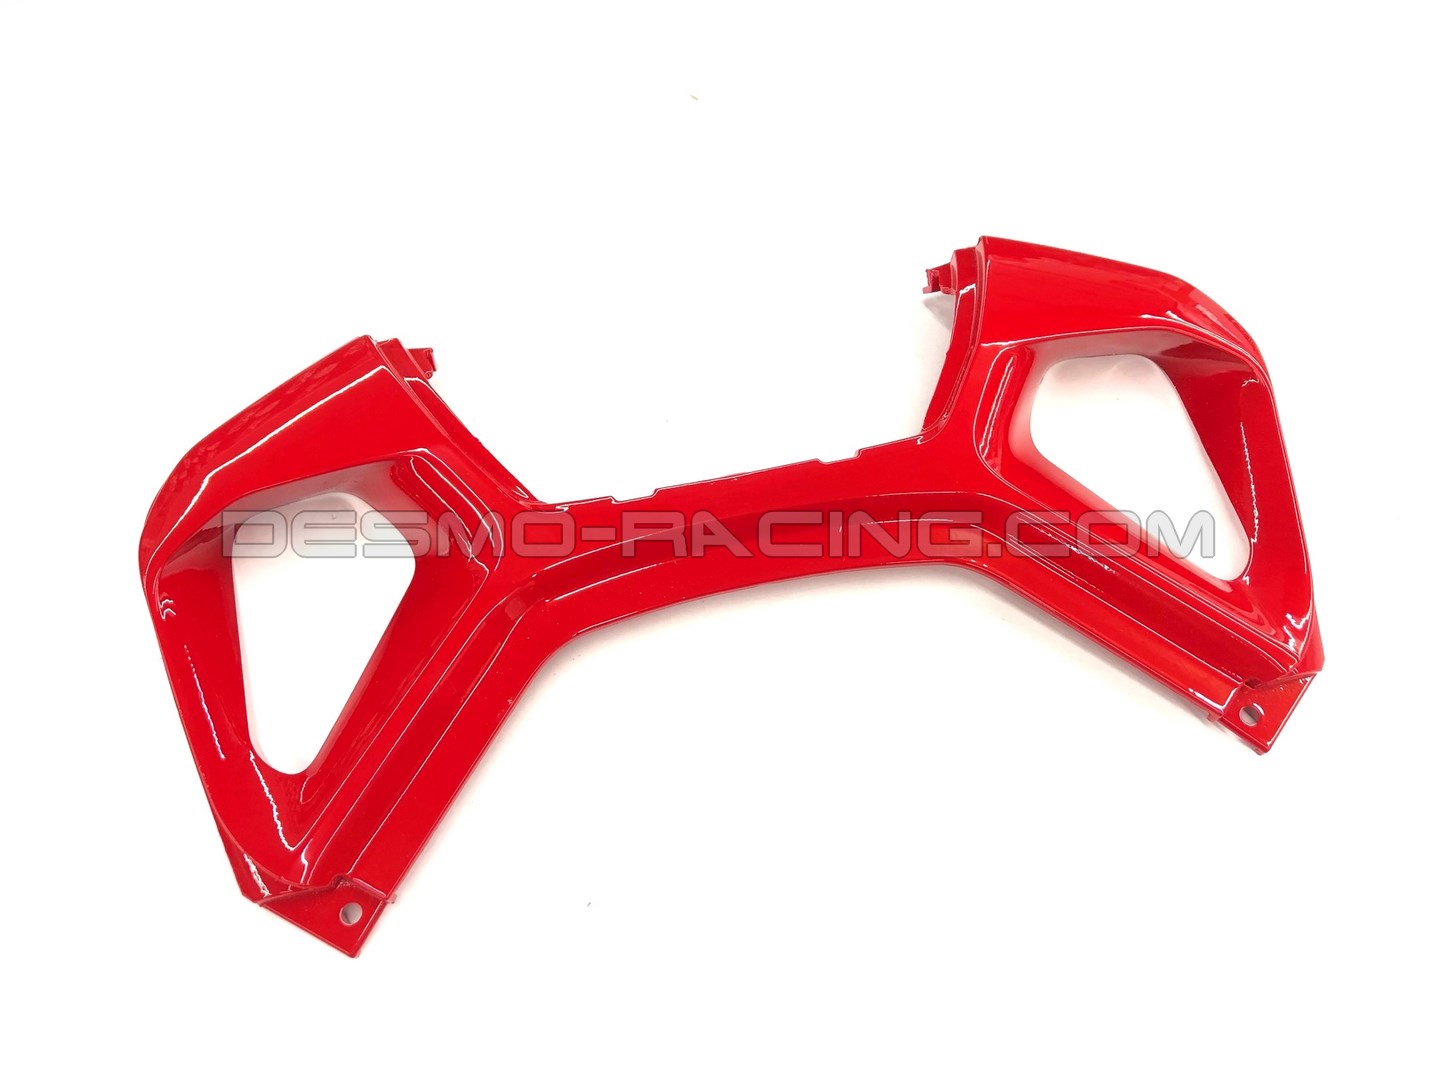 CORPS DE SELLE CENTRAL ROUGE DUCATI PANIGALE 1199 - 48311722AA